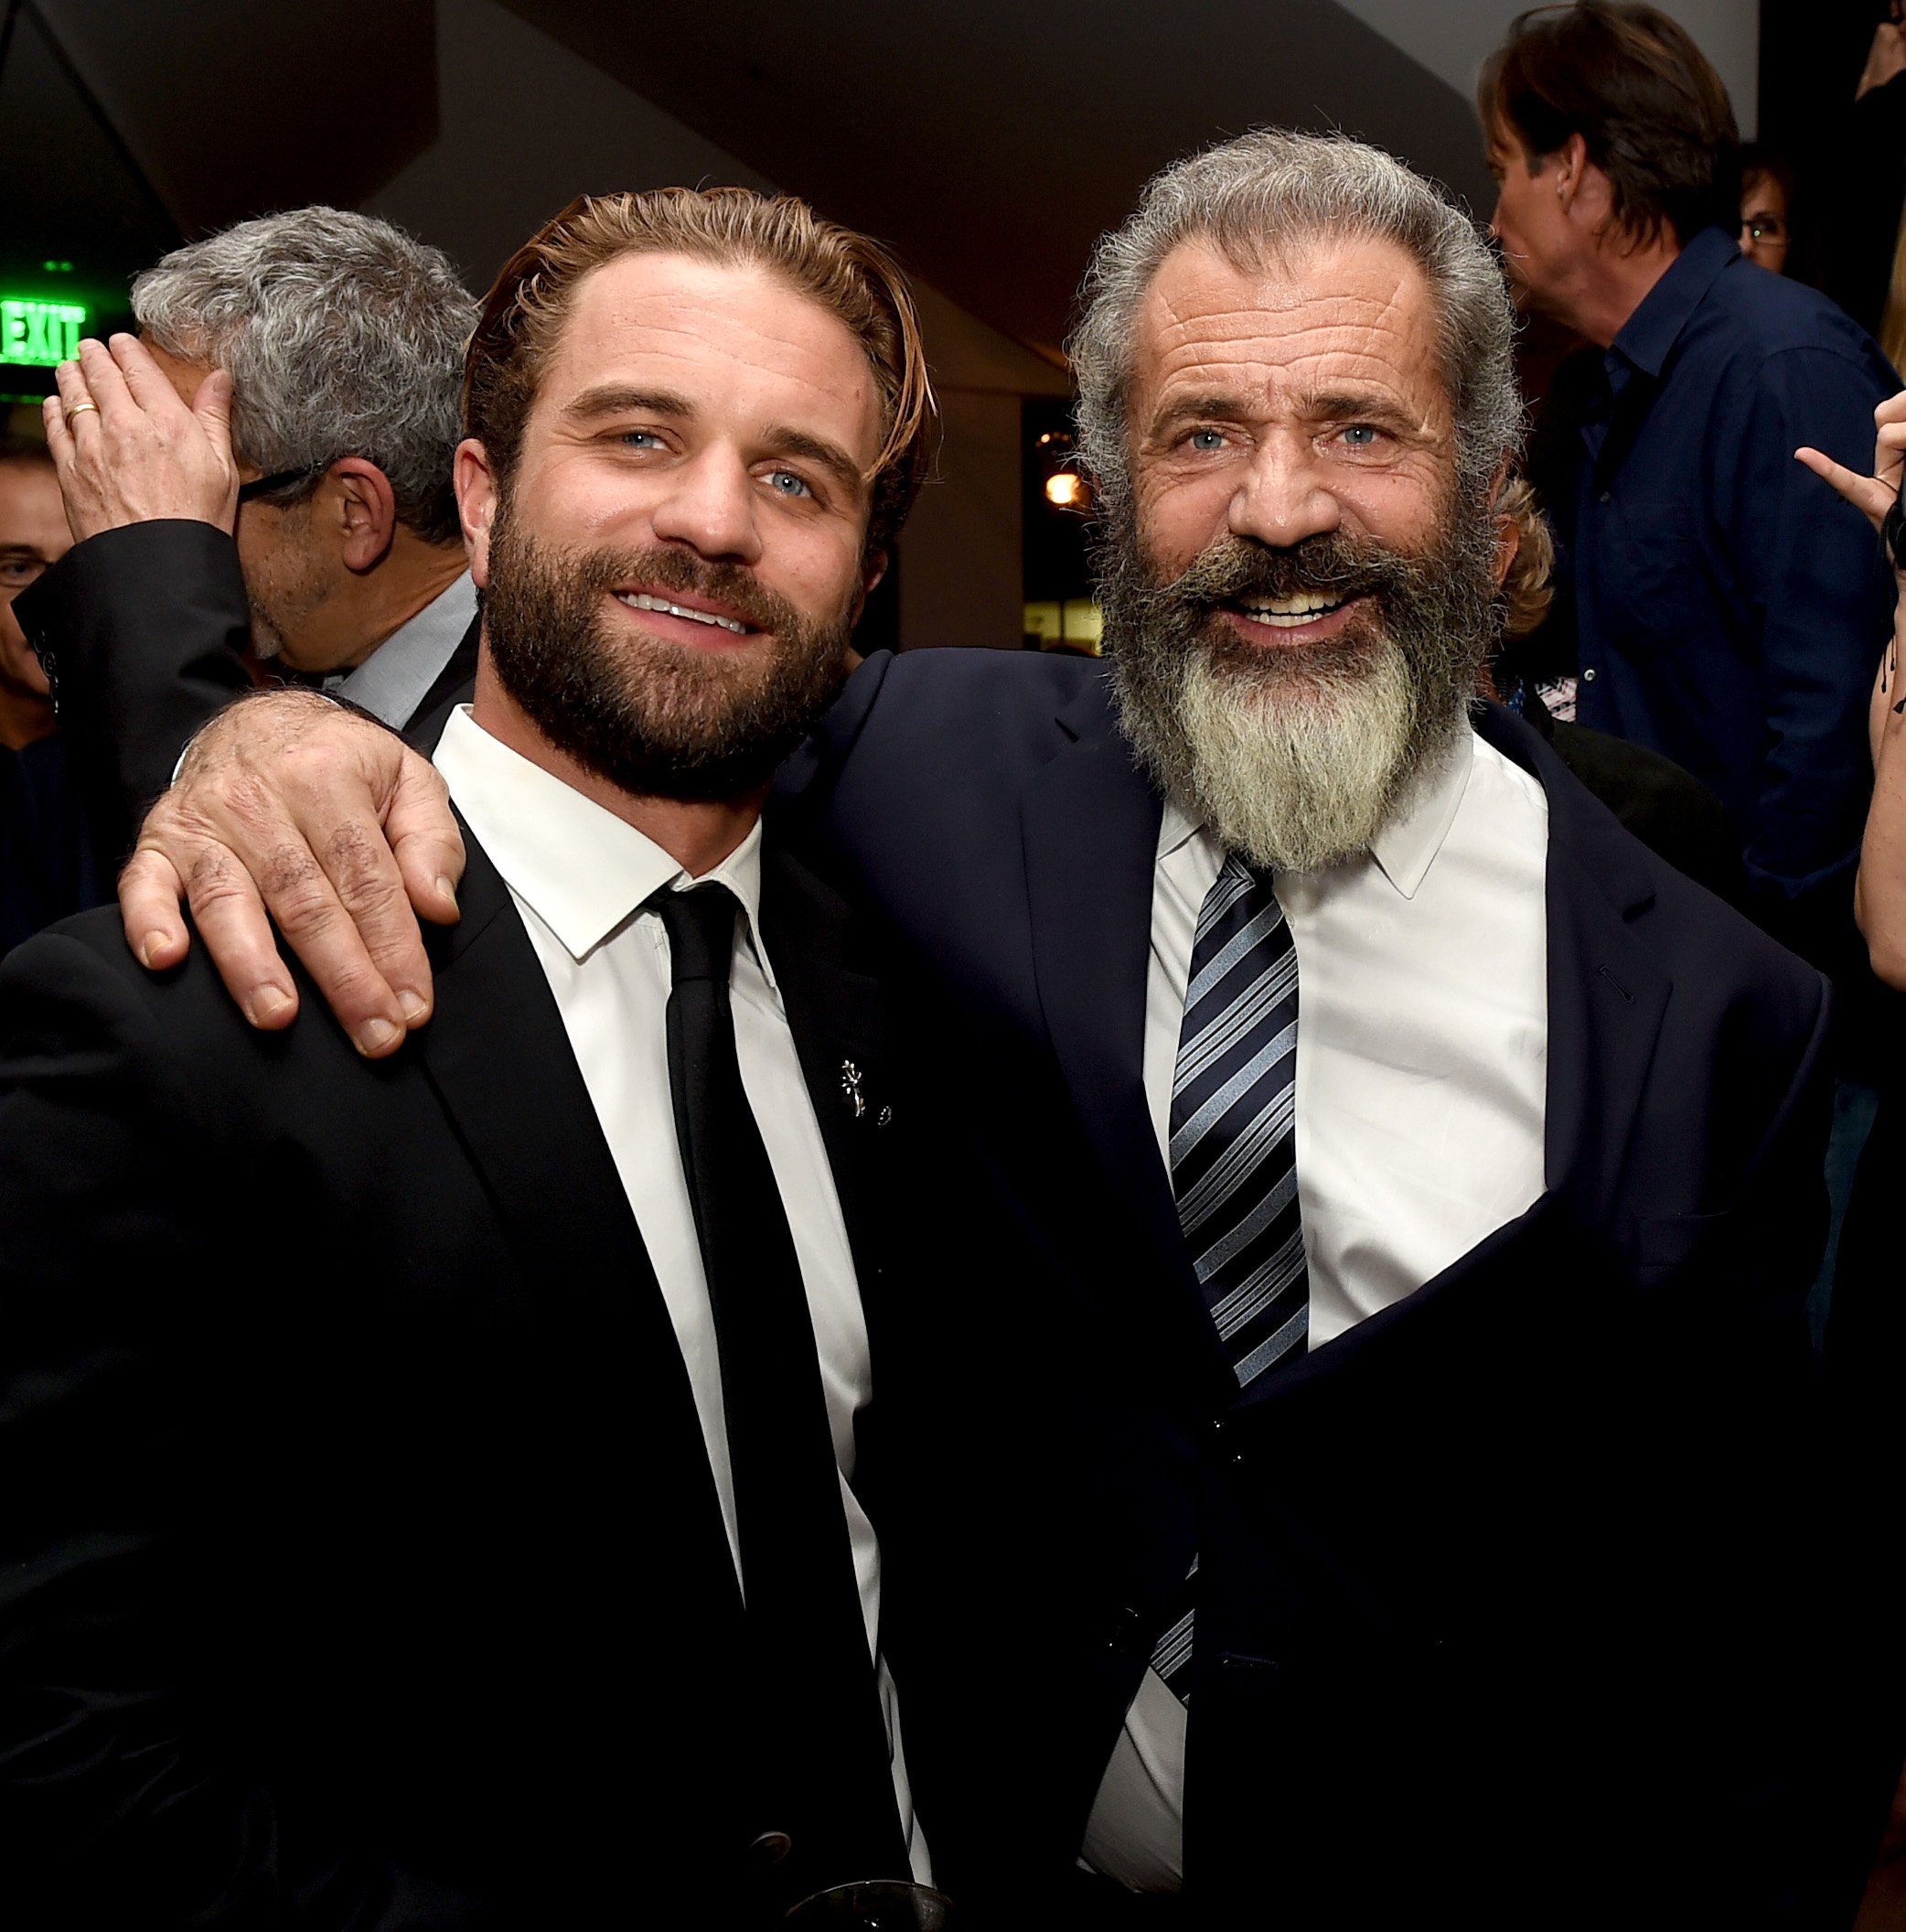 Mel Gibson and Milo Gibson at the after party for the screening of "Hacksaw Ridge" on October 24, 2016 | Source: Getty Images